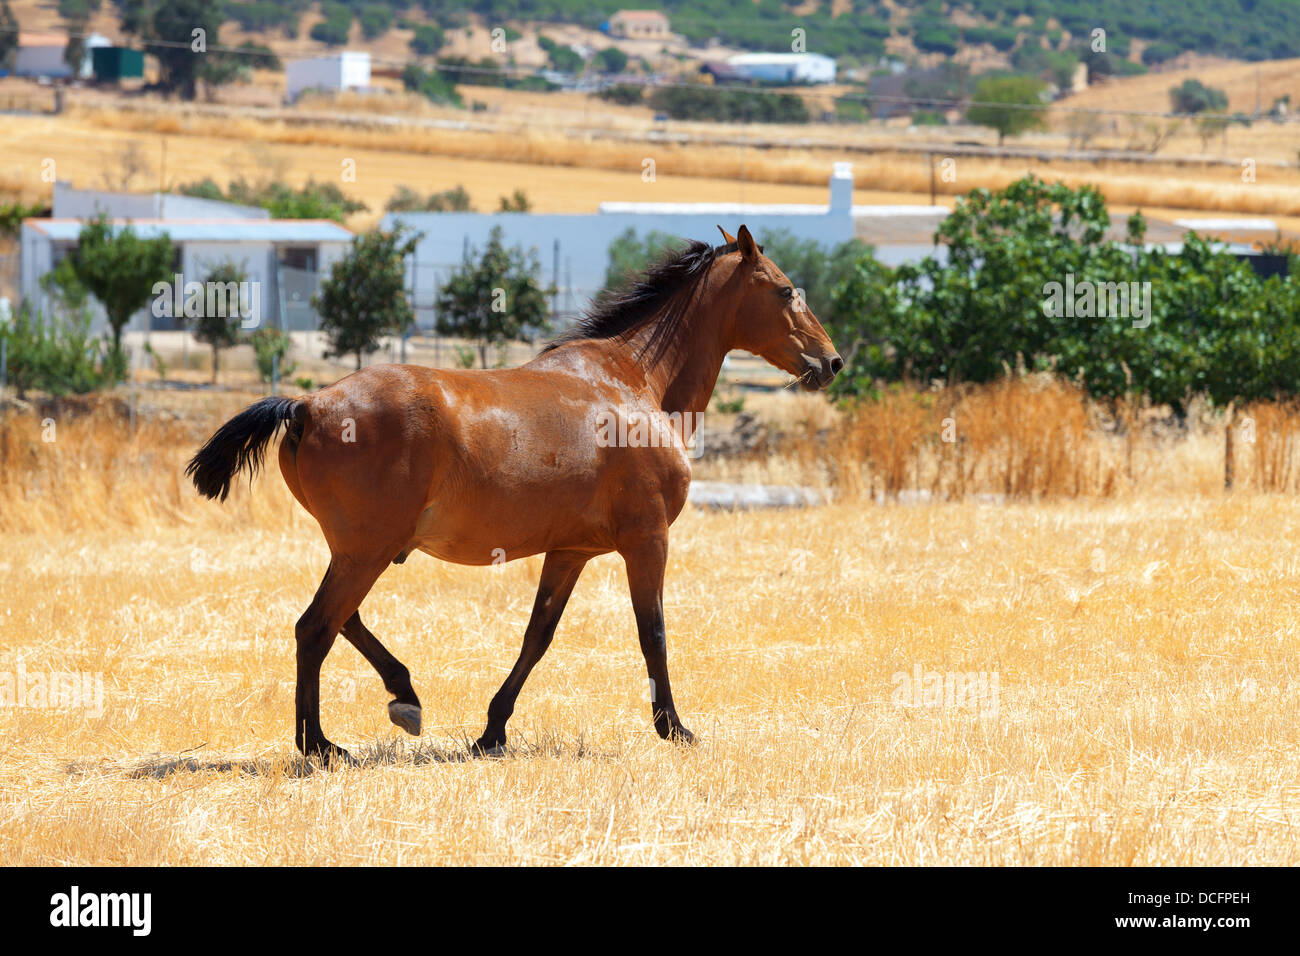 Horse with a well groomed and trimmed tail walking through a rural pasture with farm buildings visible in the distance Stock Photo